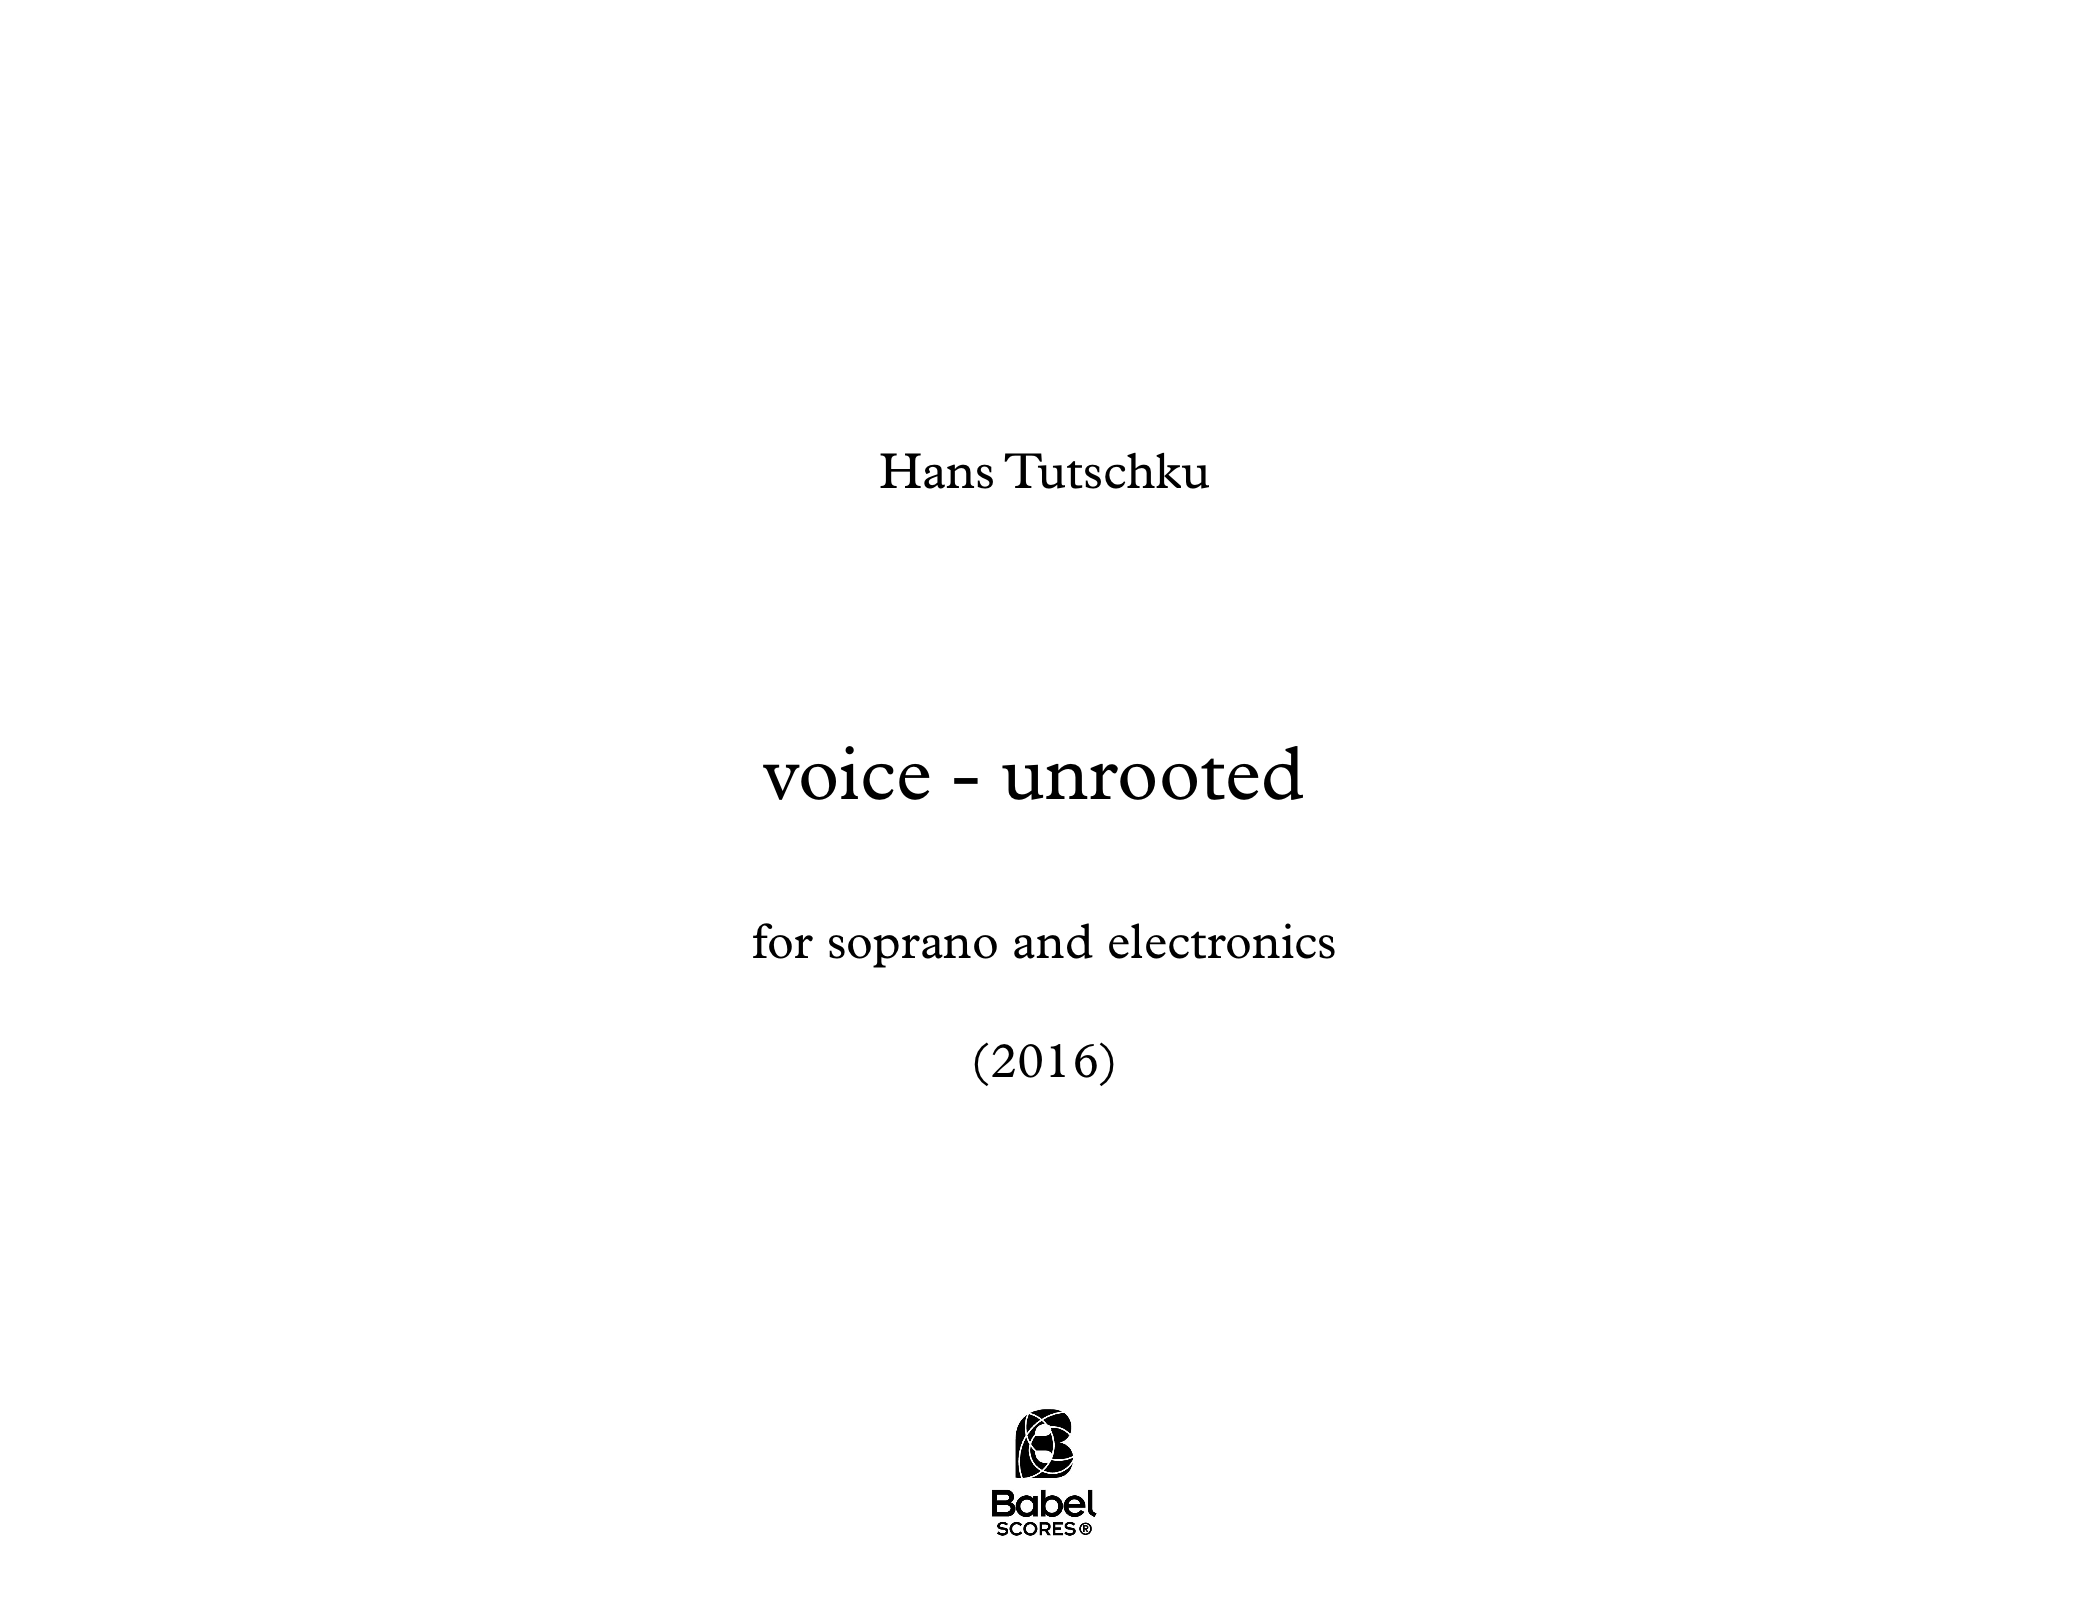 voice unrooted CARTA z 3 107 1 167